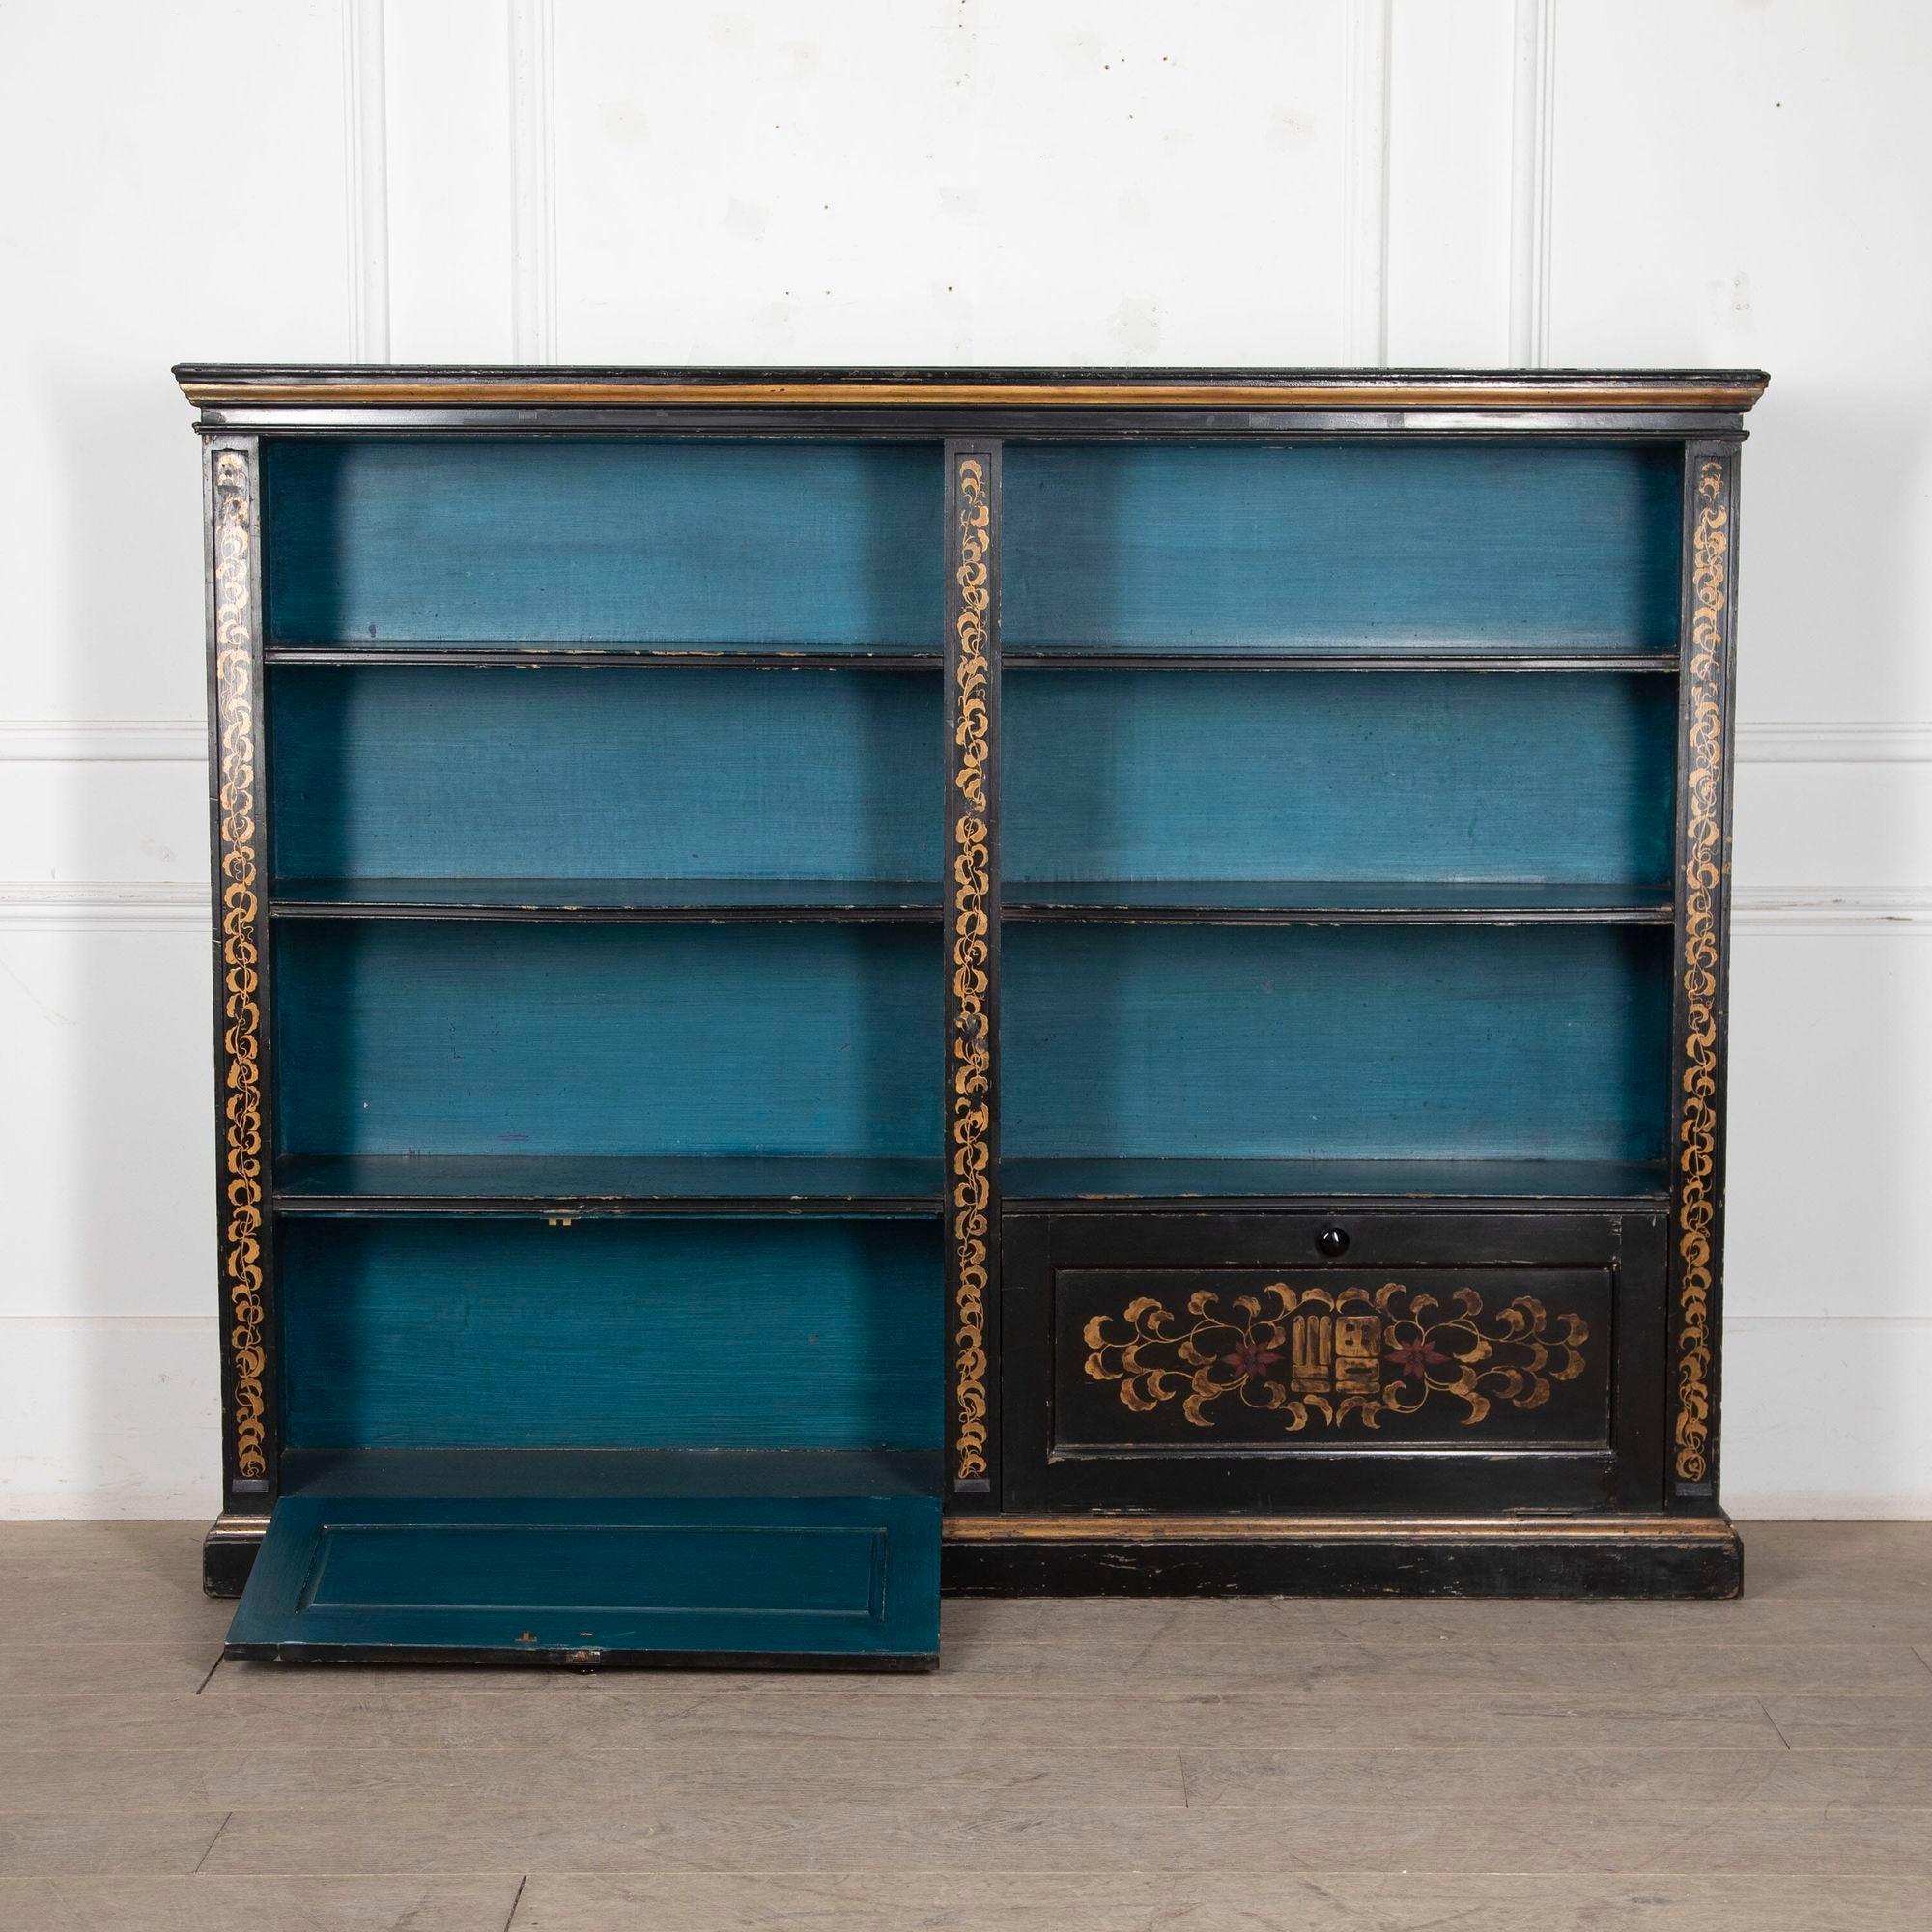 Original 20th century ebonized bookcase with painted chinoiserie decoration and peacock blue interior. 
circa 1920.